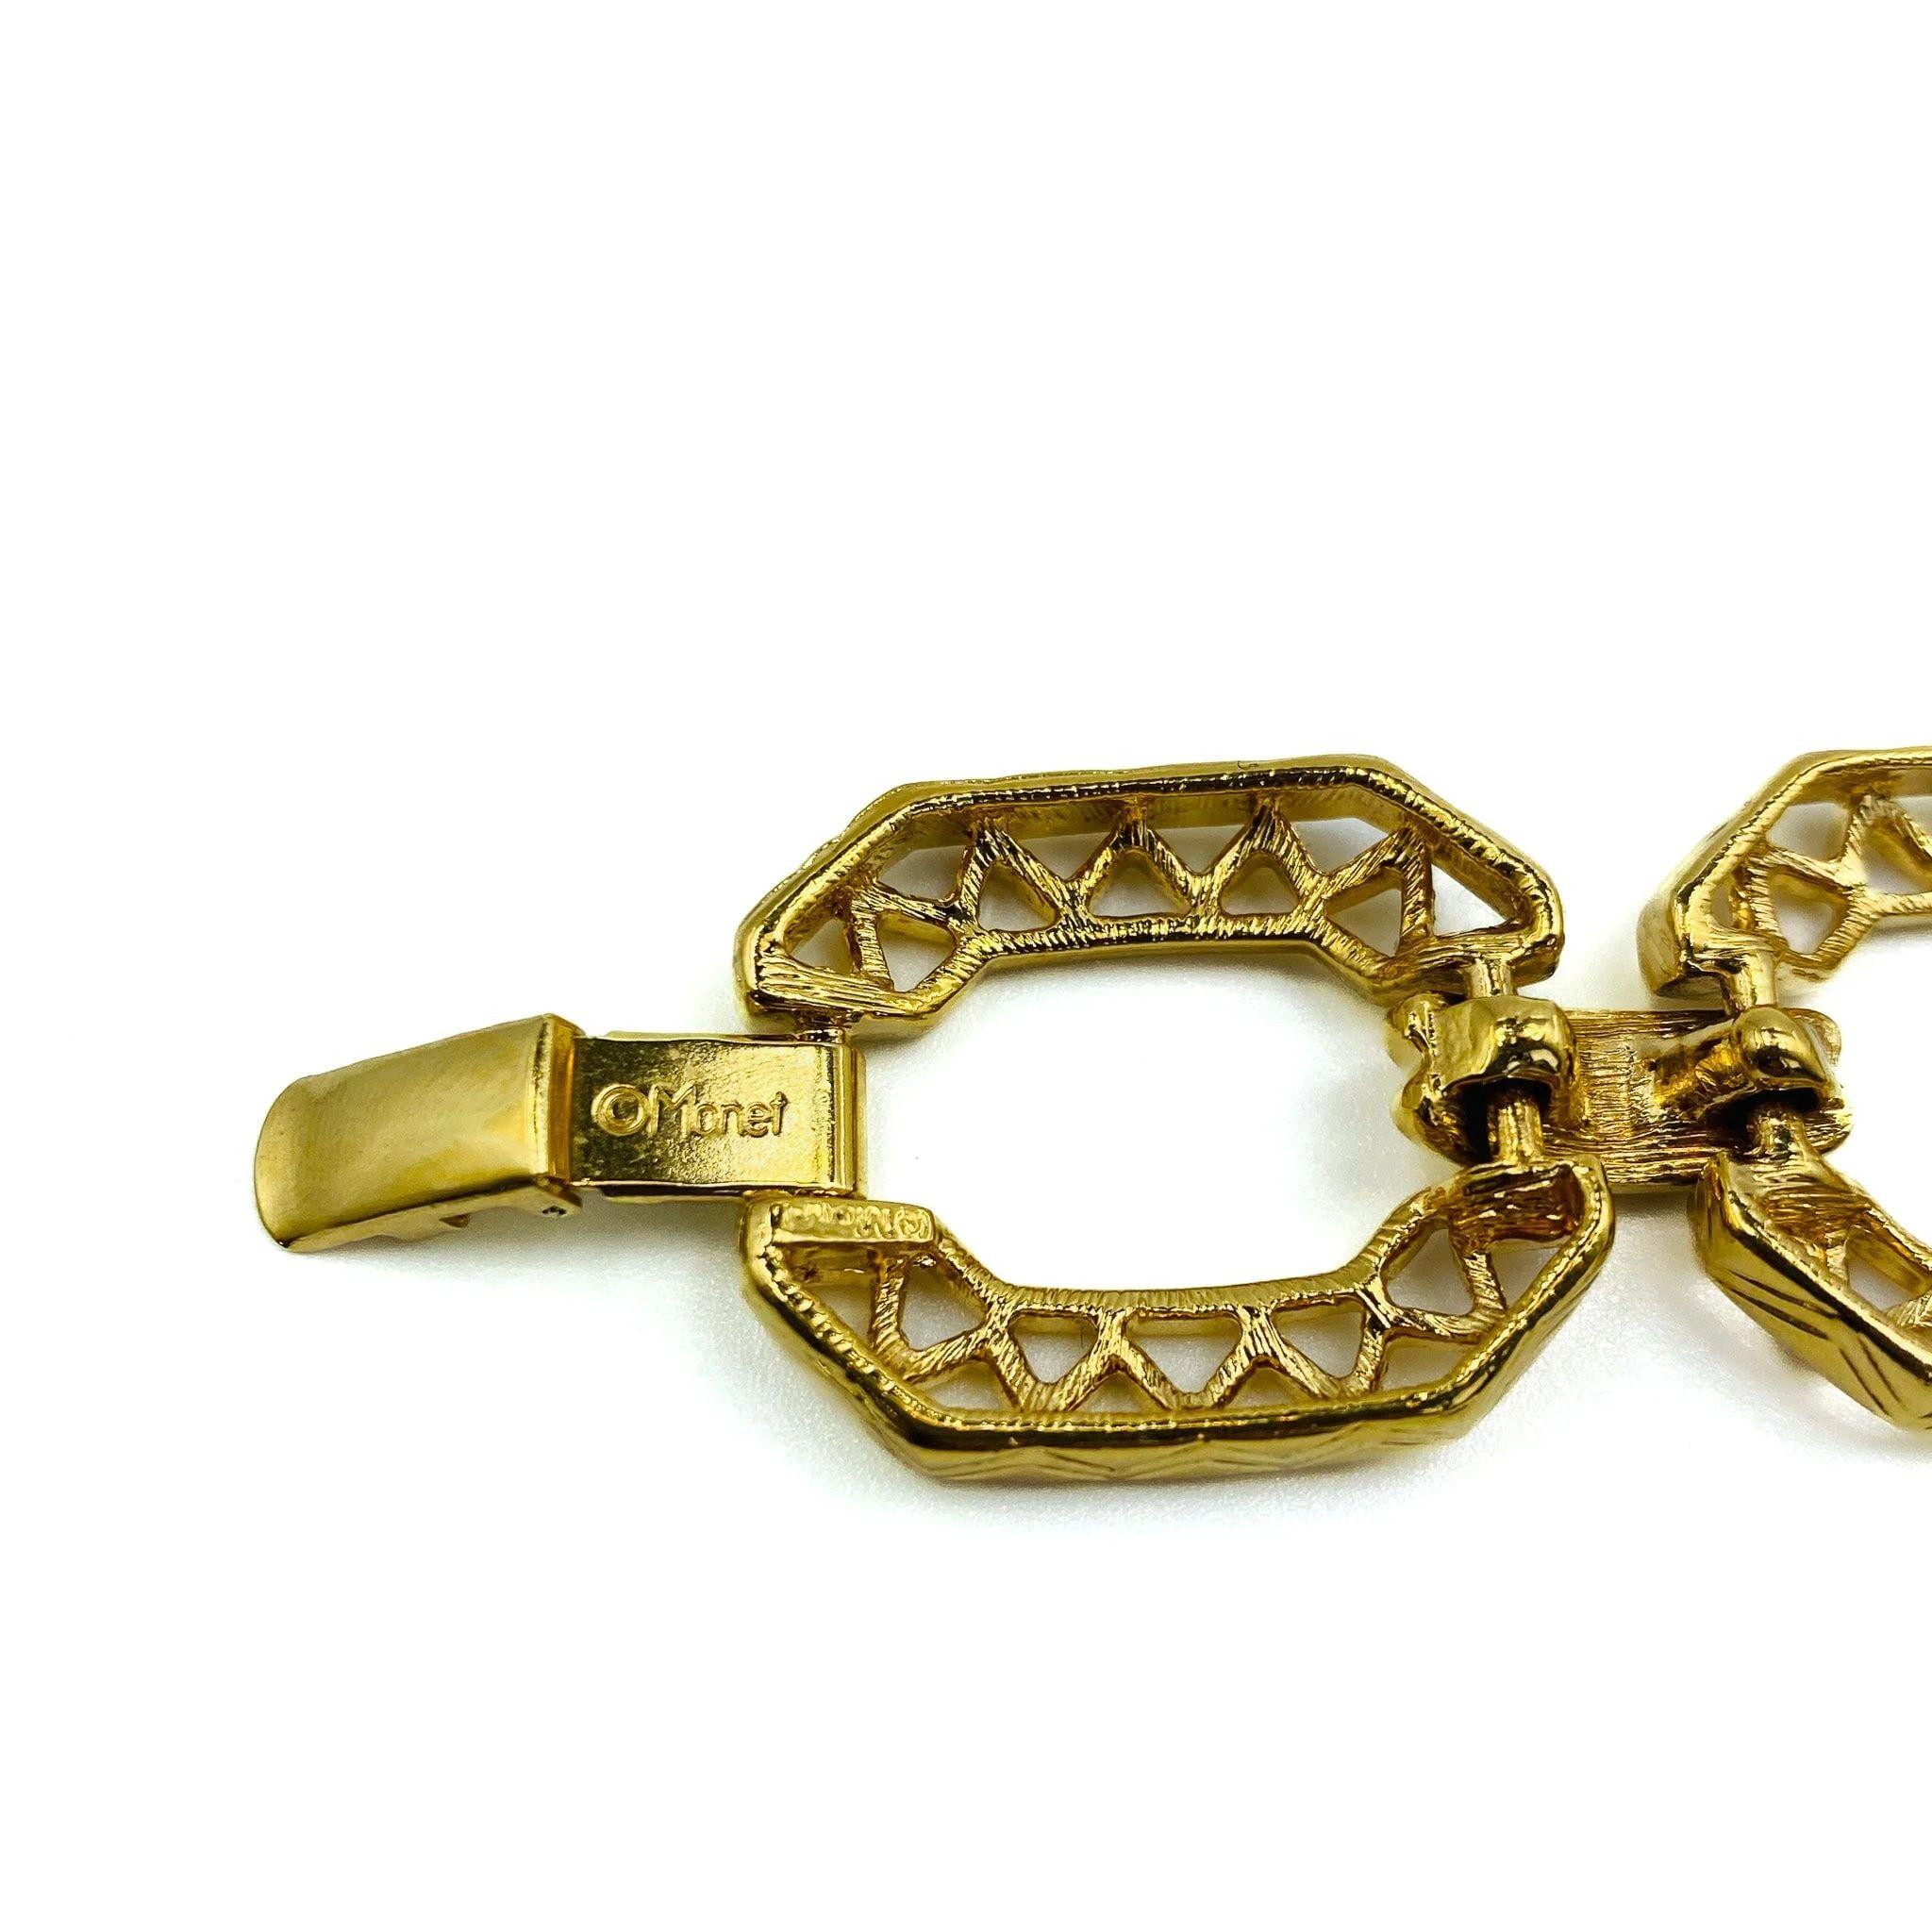 Vintage Monet Bracelet 1980s

Beautiful statement bracelet from Monet one of the world's most famous costume jewellers. Crafted in the USA in the 1980s from high quality open work gold plated metal.

In 1937, Monet began producing high-quality